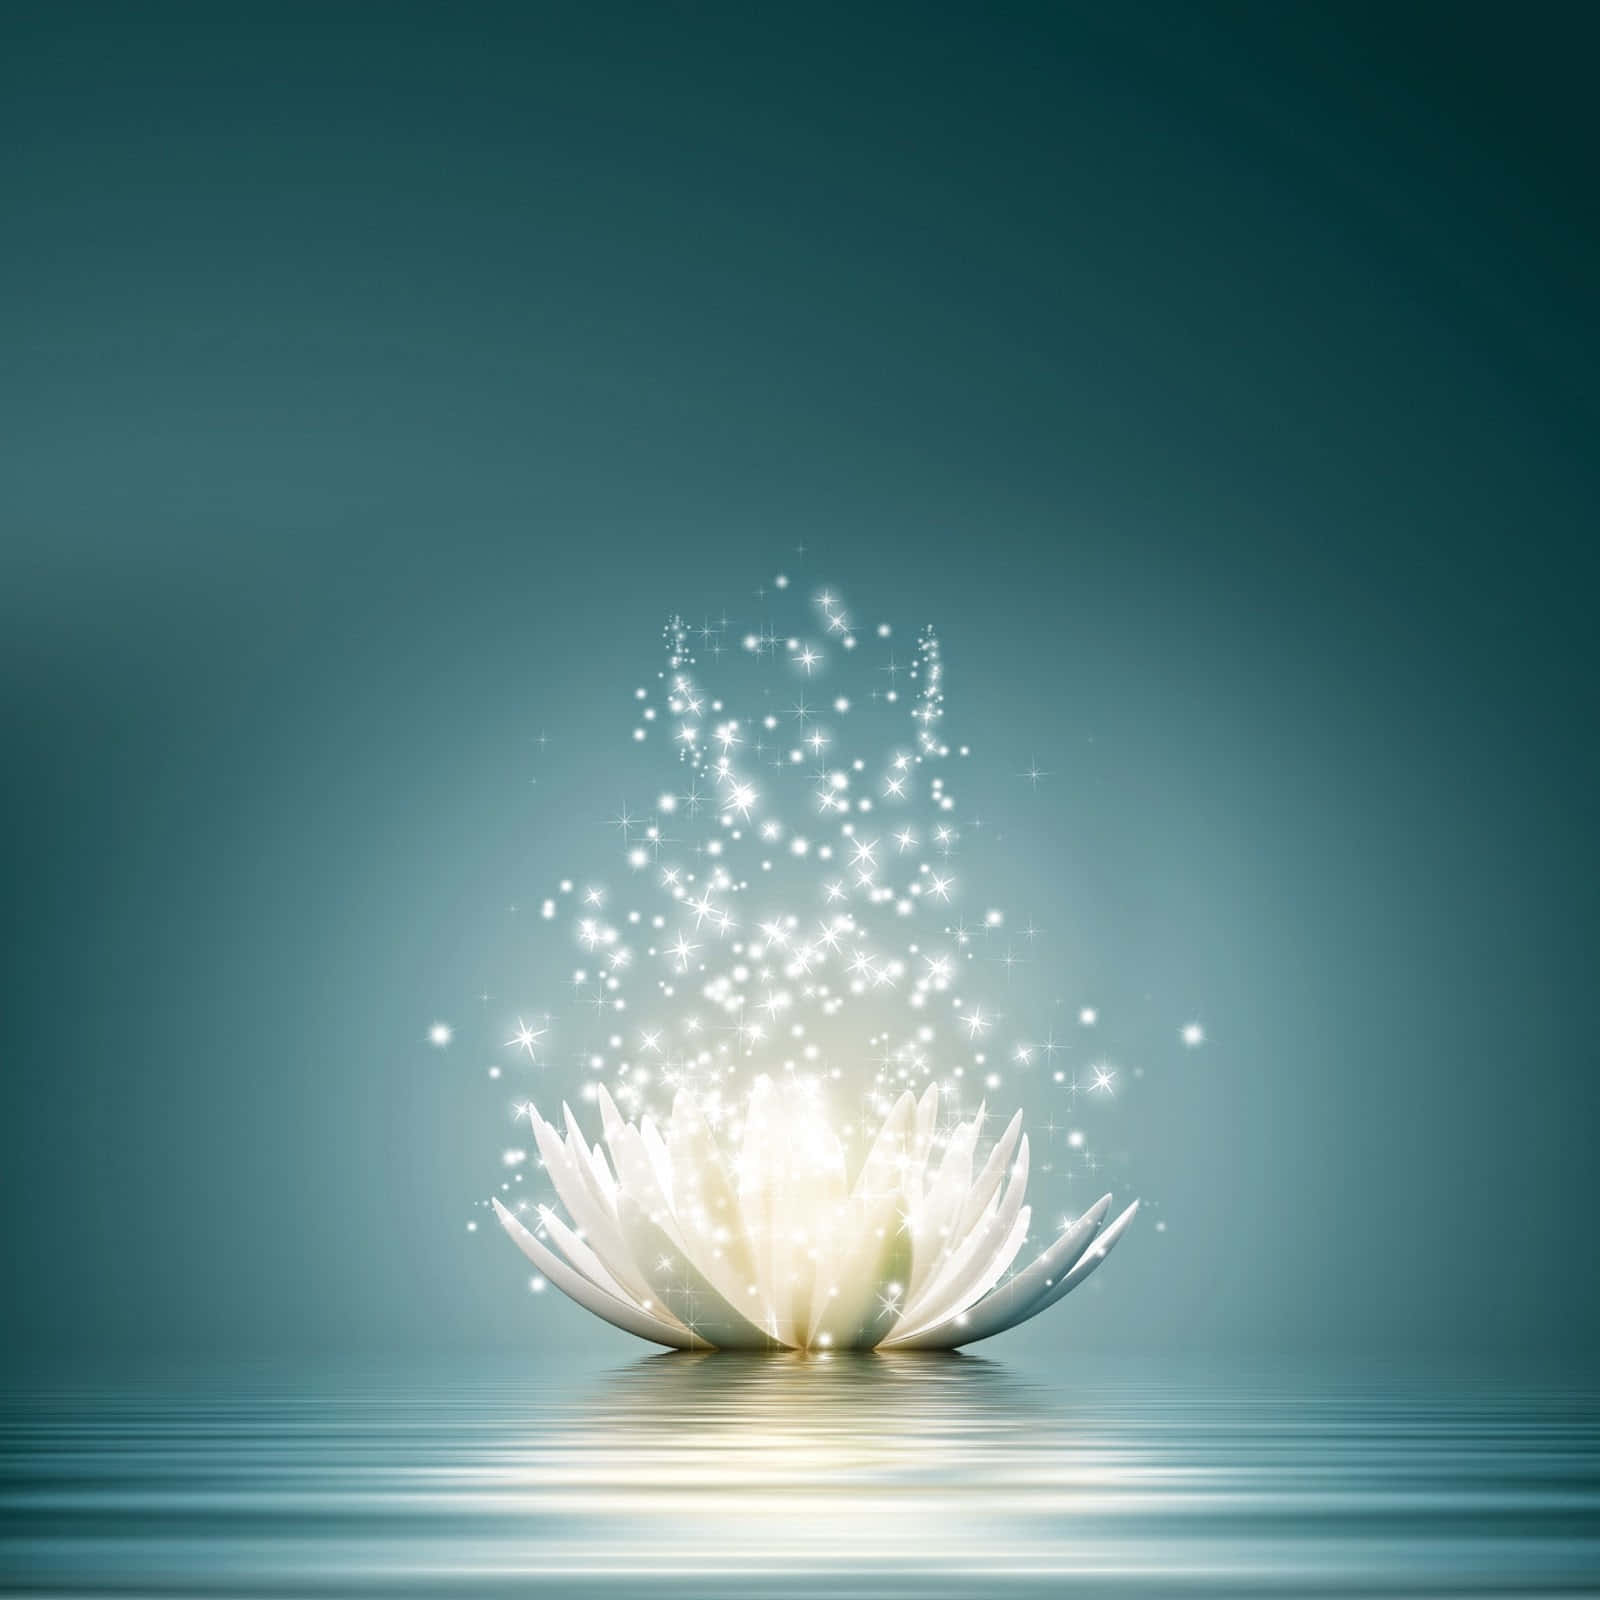 A White Lotus Flower With Stars On The Water Wallpaper